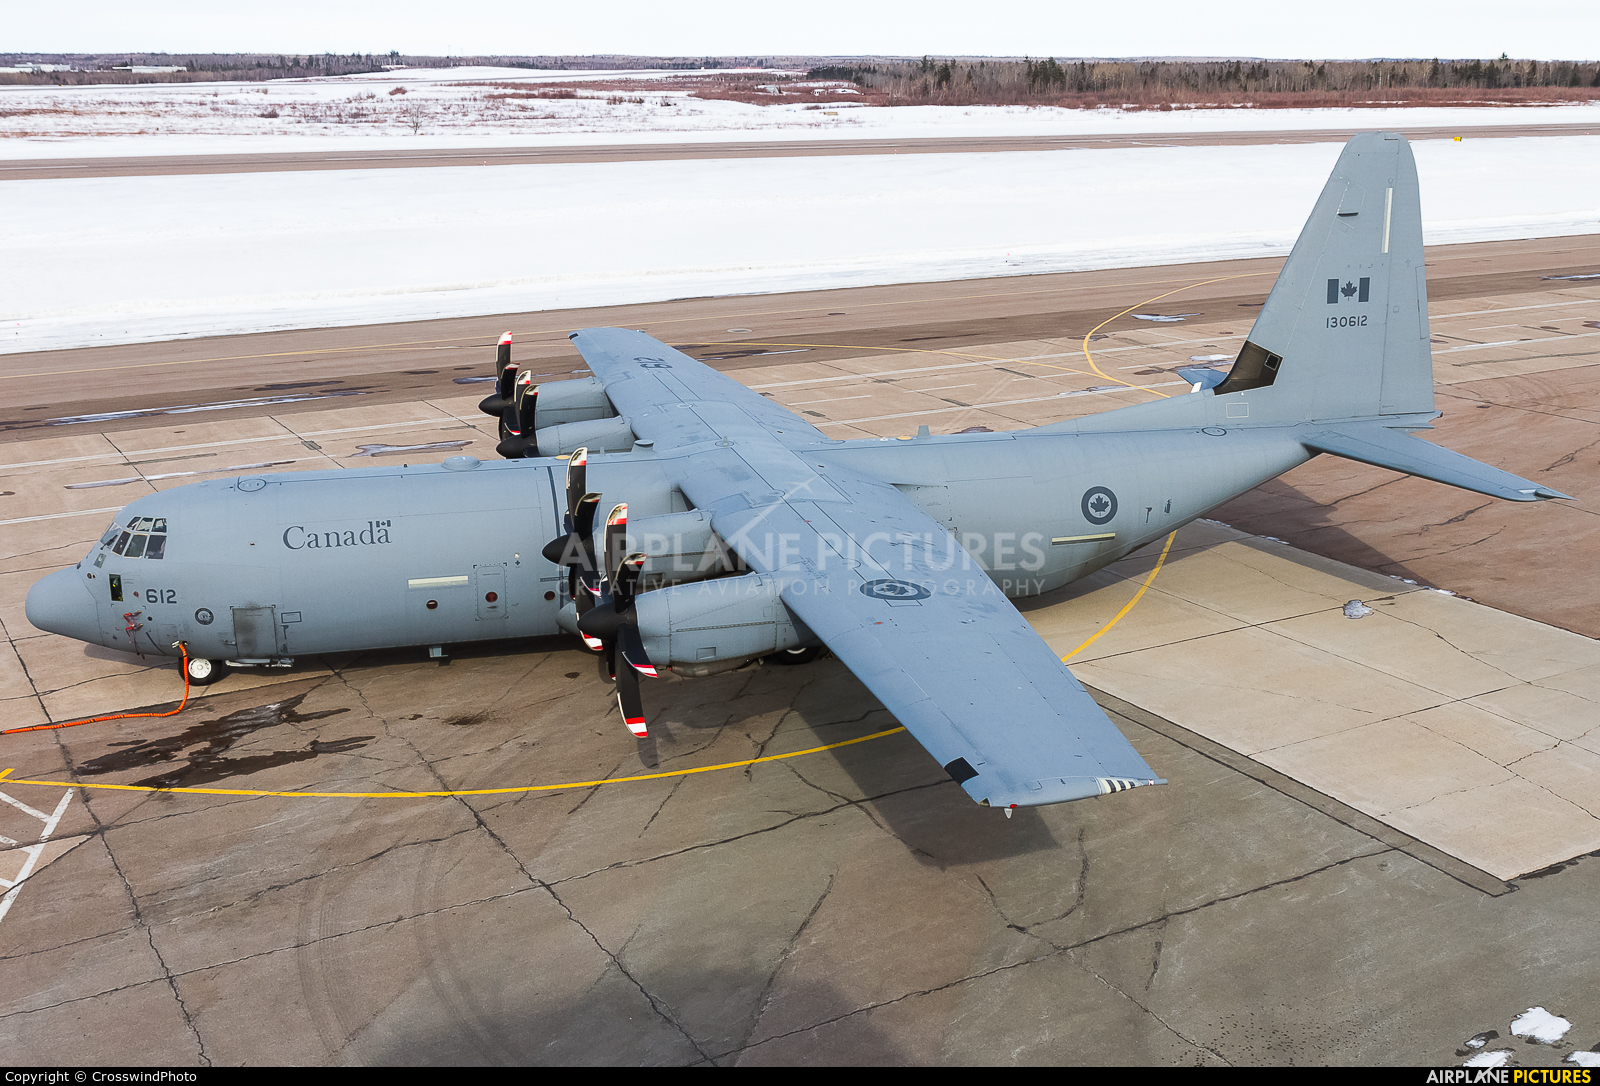 Canada - Air Force 130612 aircraft at greater Moncton International